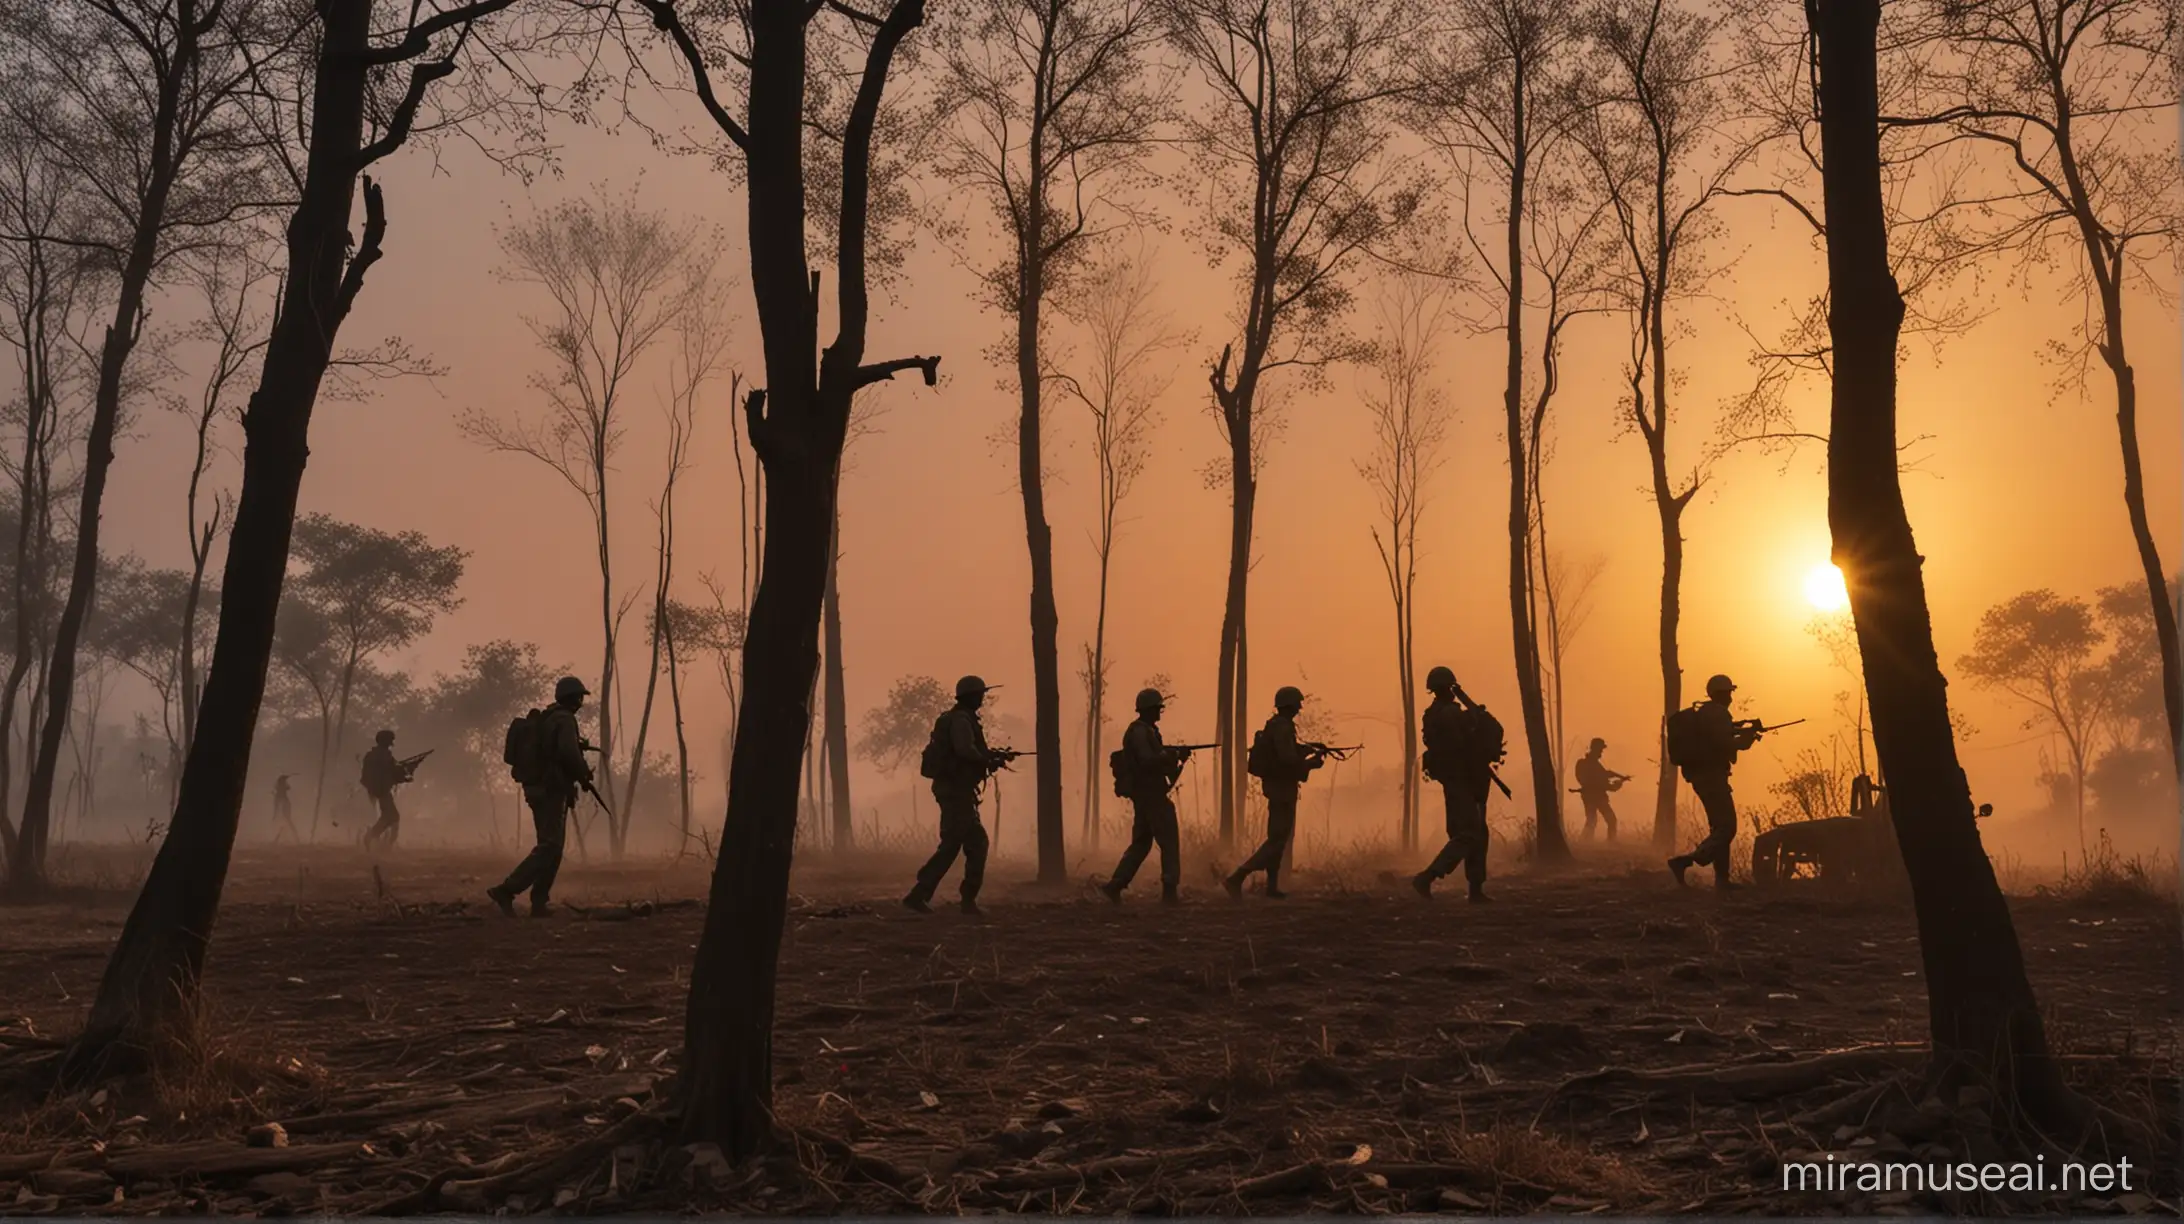 Naxalite attack on indian army in forest, sunset behind, image should be in shadow,